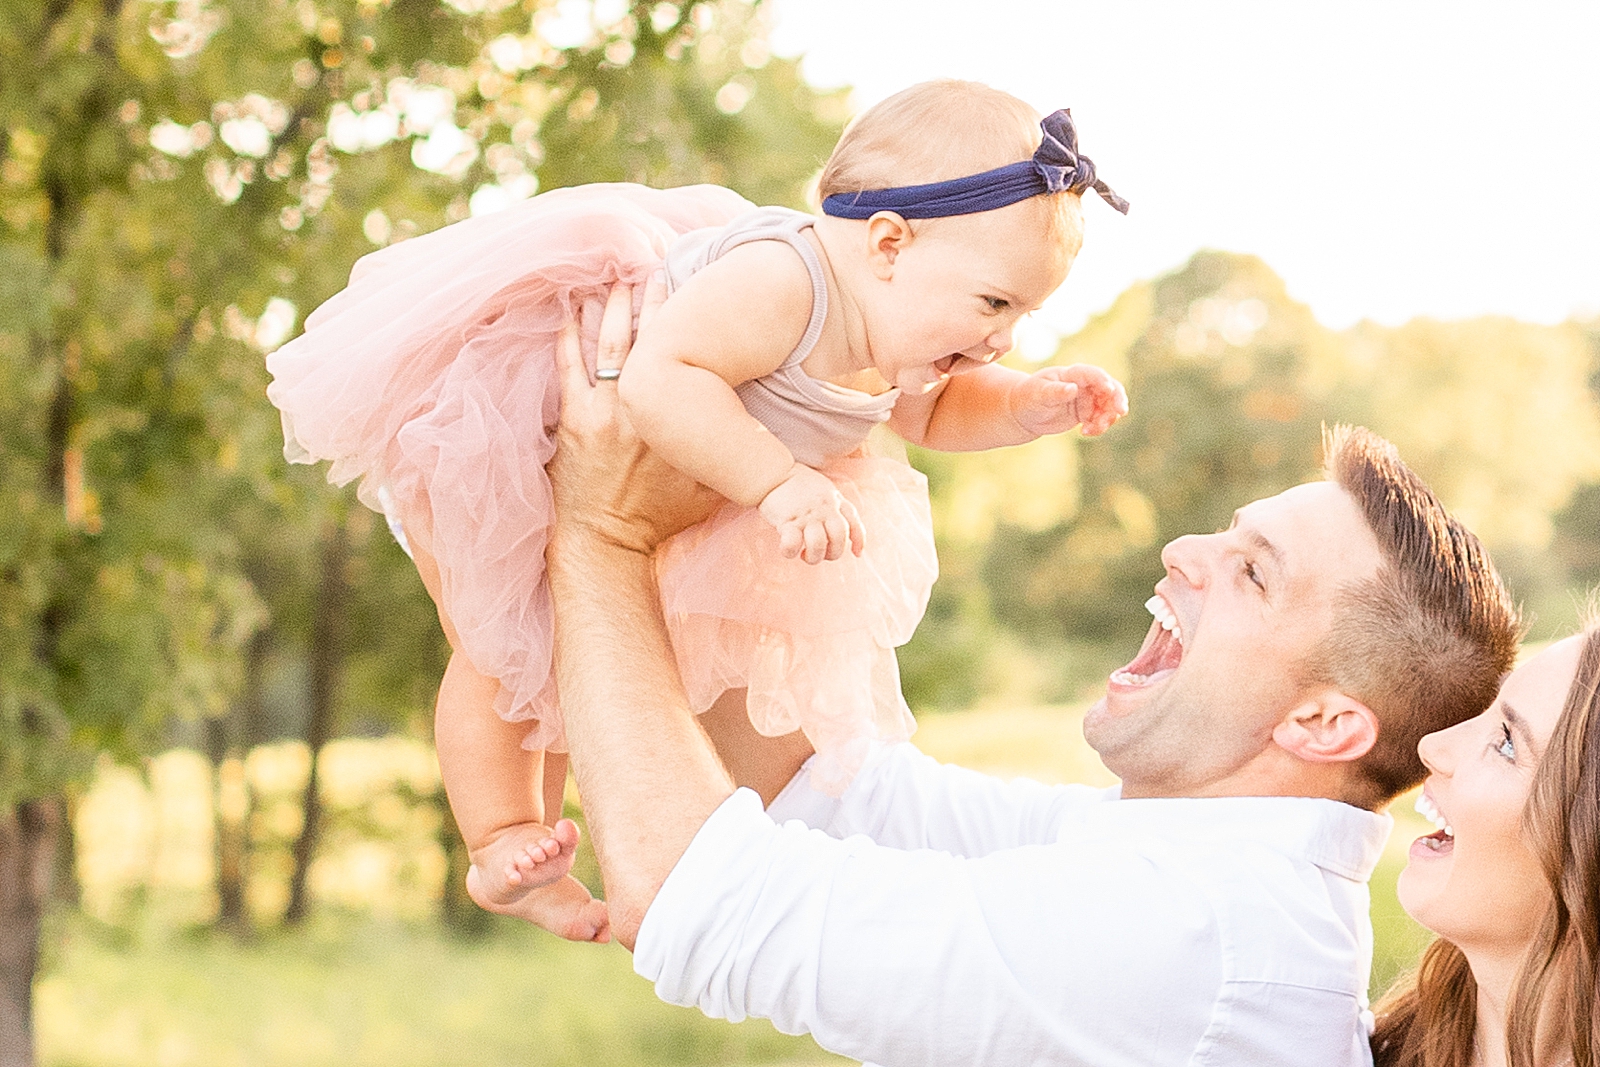 dad holding up baby girl in pink tutu while baby gives big smiles